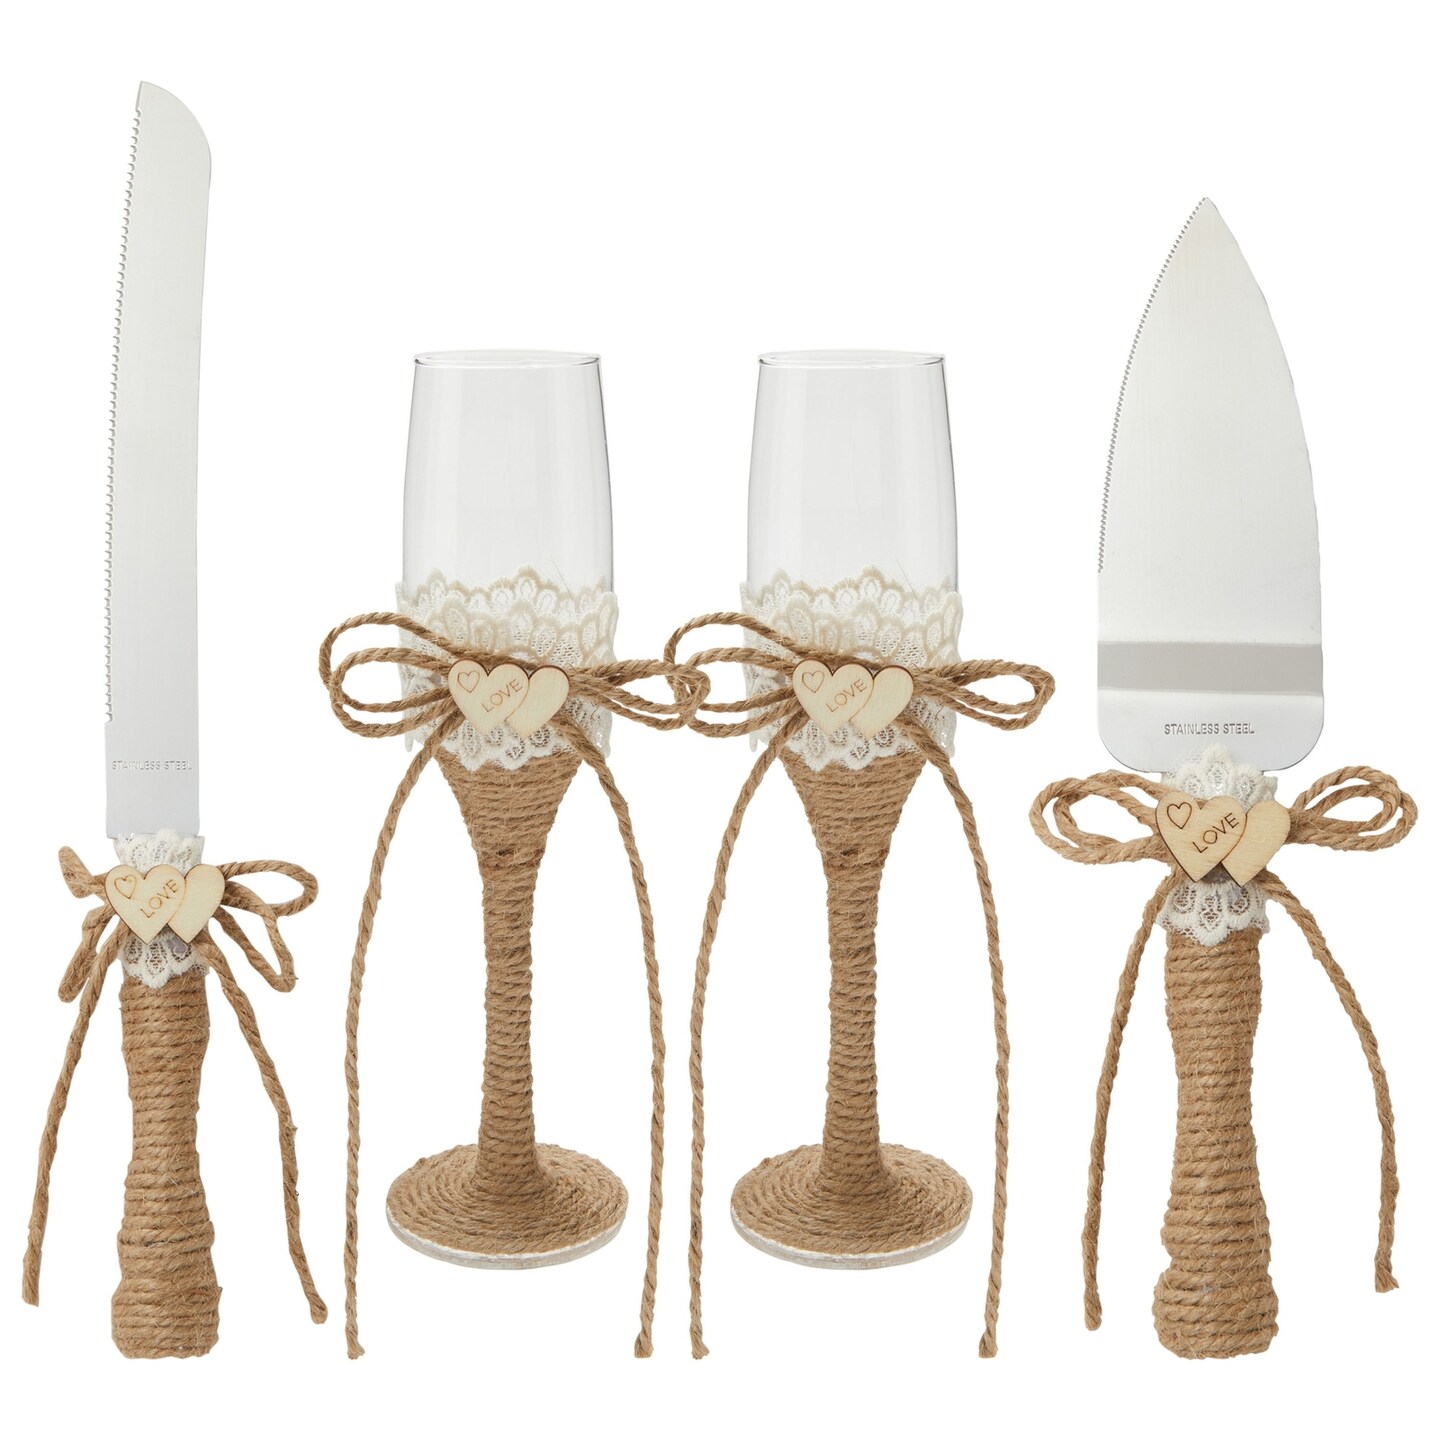 4 Piece Rustic-Style Wedding Cake Knife and Server Set with Champagne Glasses for Bride and Groom, Farmhouse Theme Reception, Country Decorations